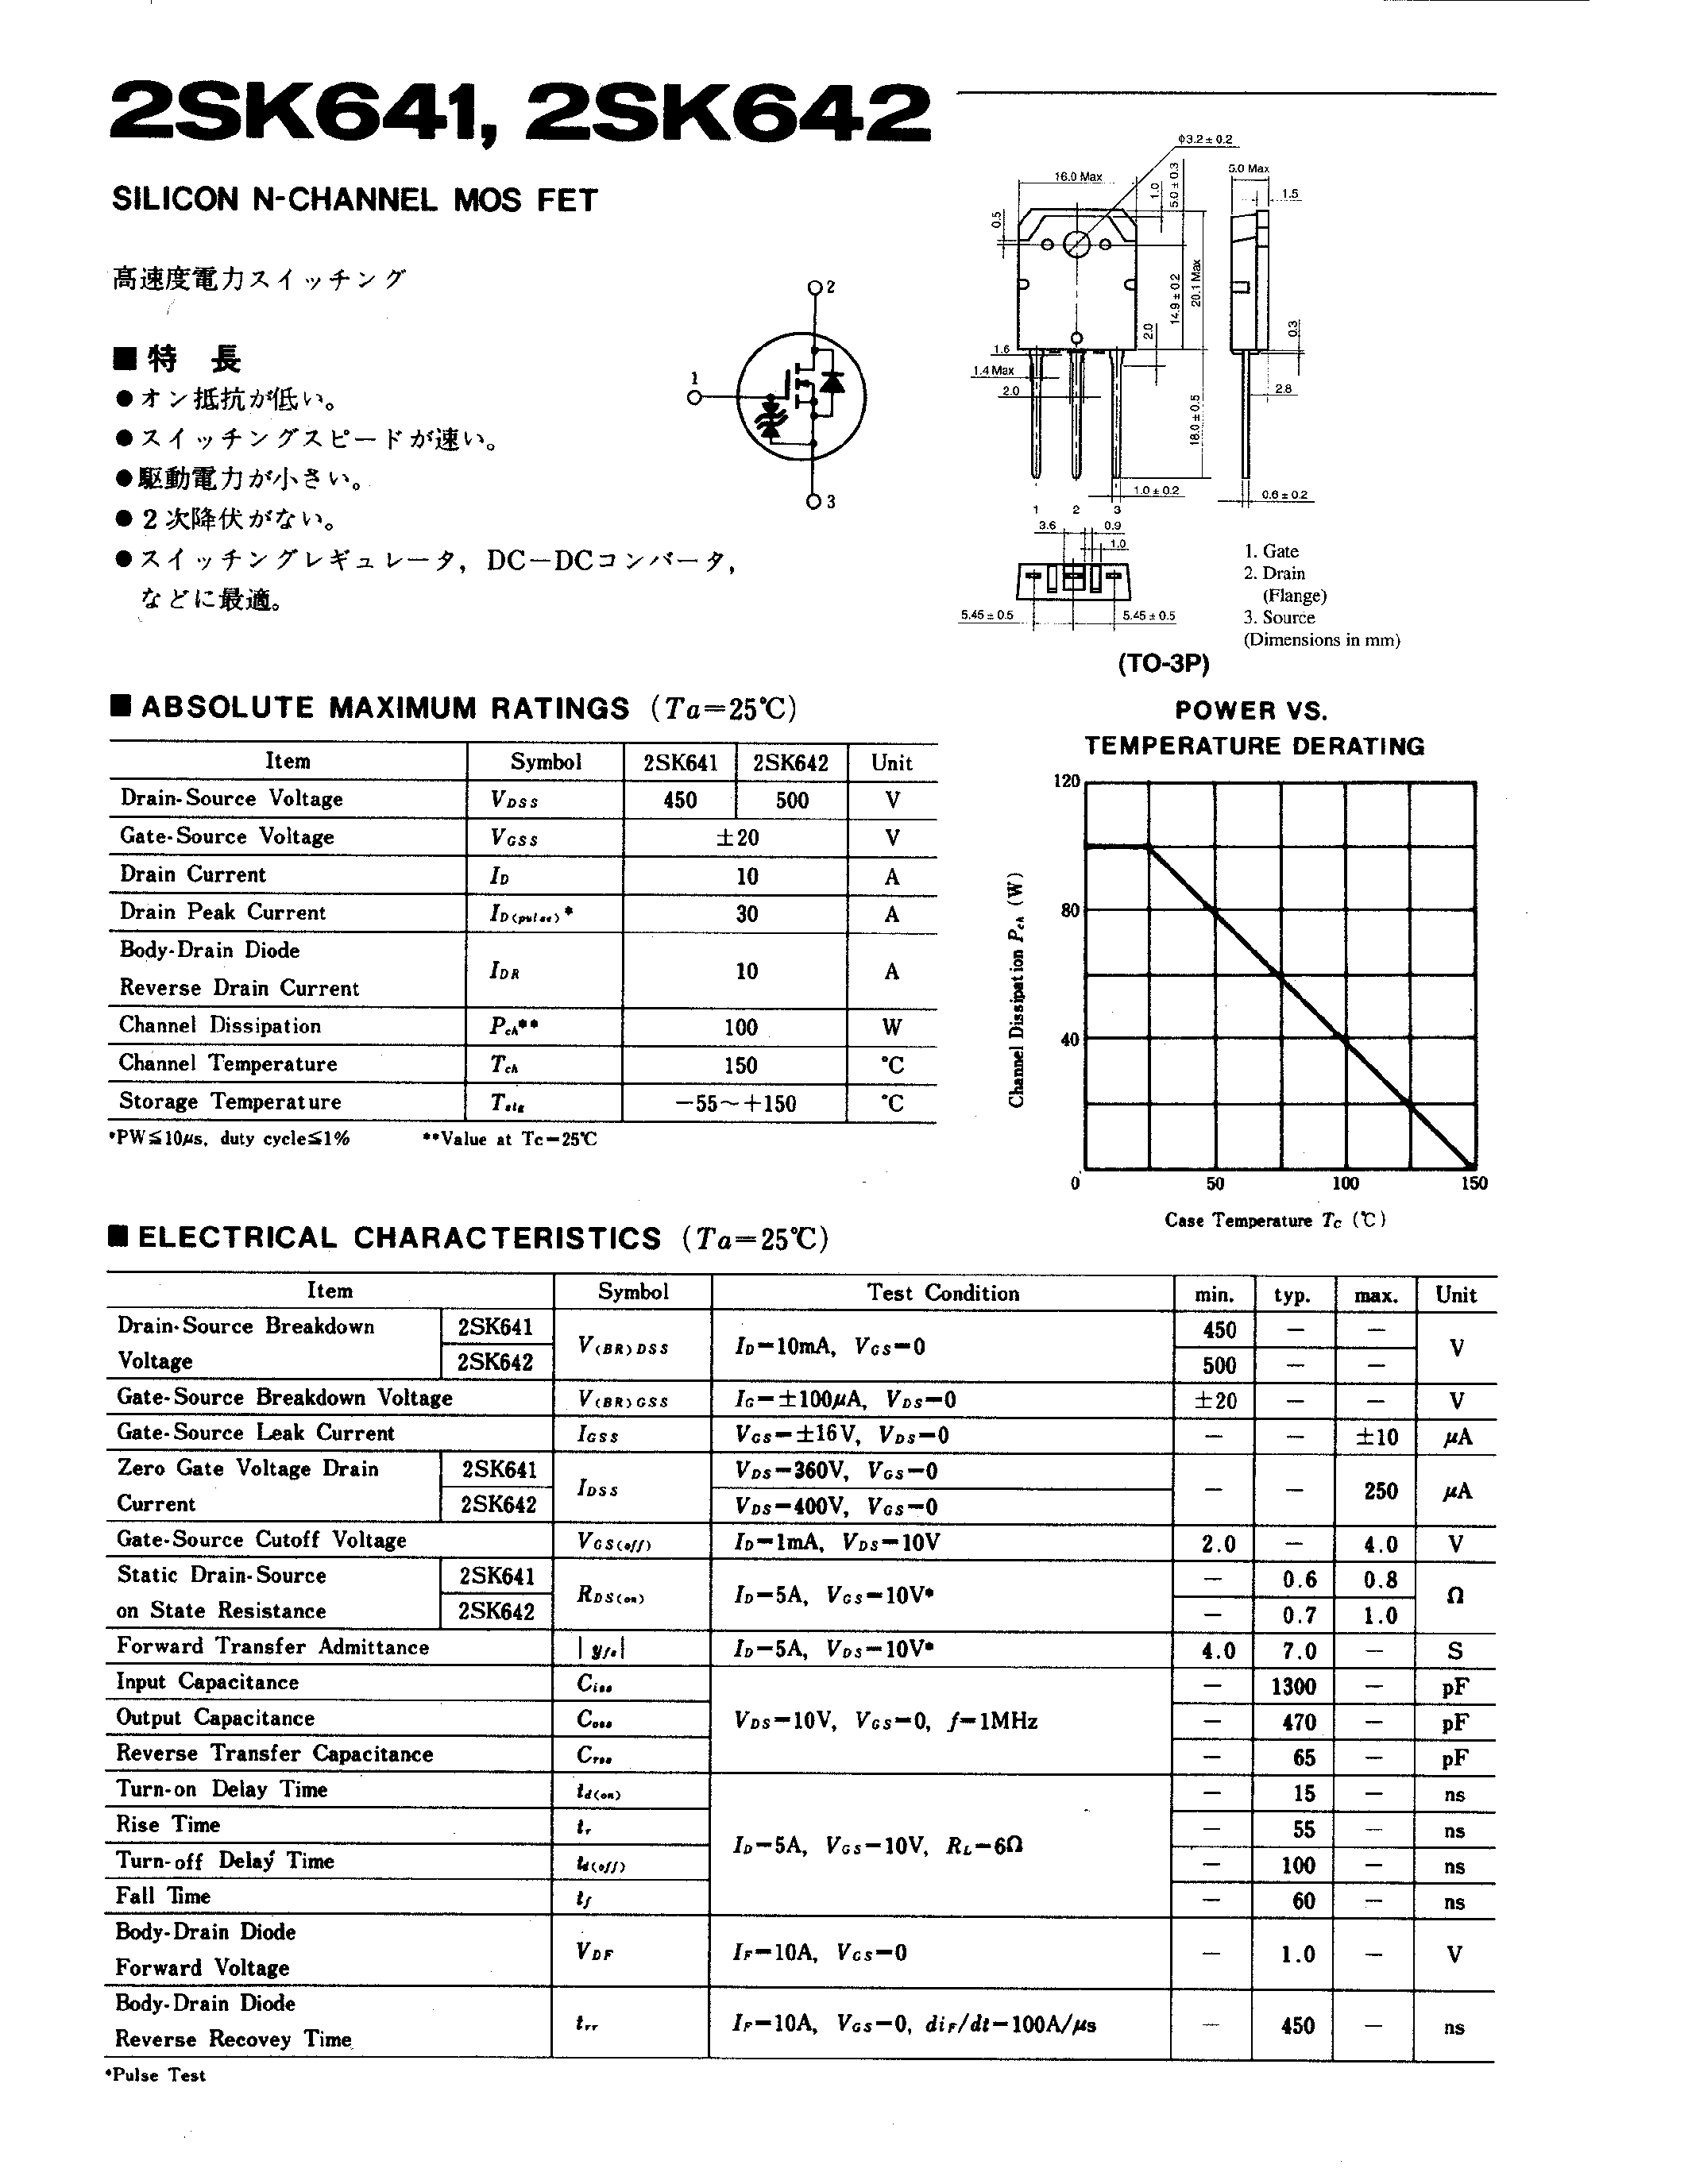 Datasheet 2SK641 - (2SK641 / 2SK642) SILICON N-CHANNEL MOS FET page 1